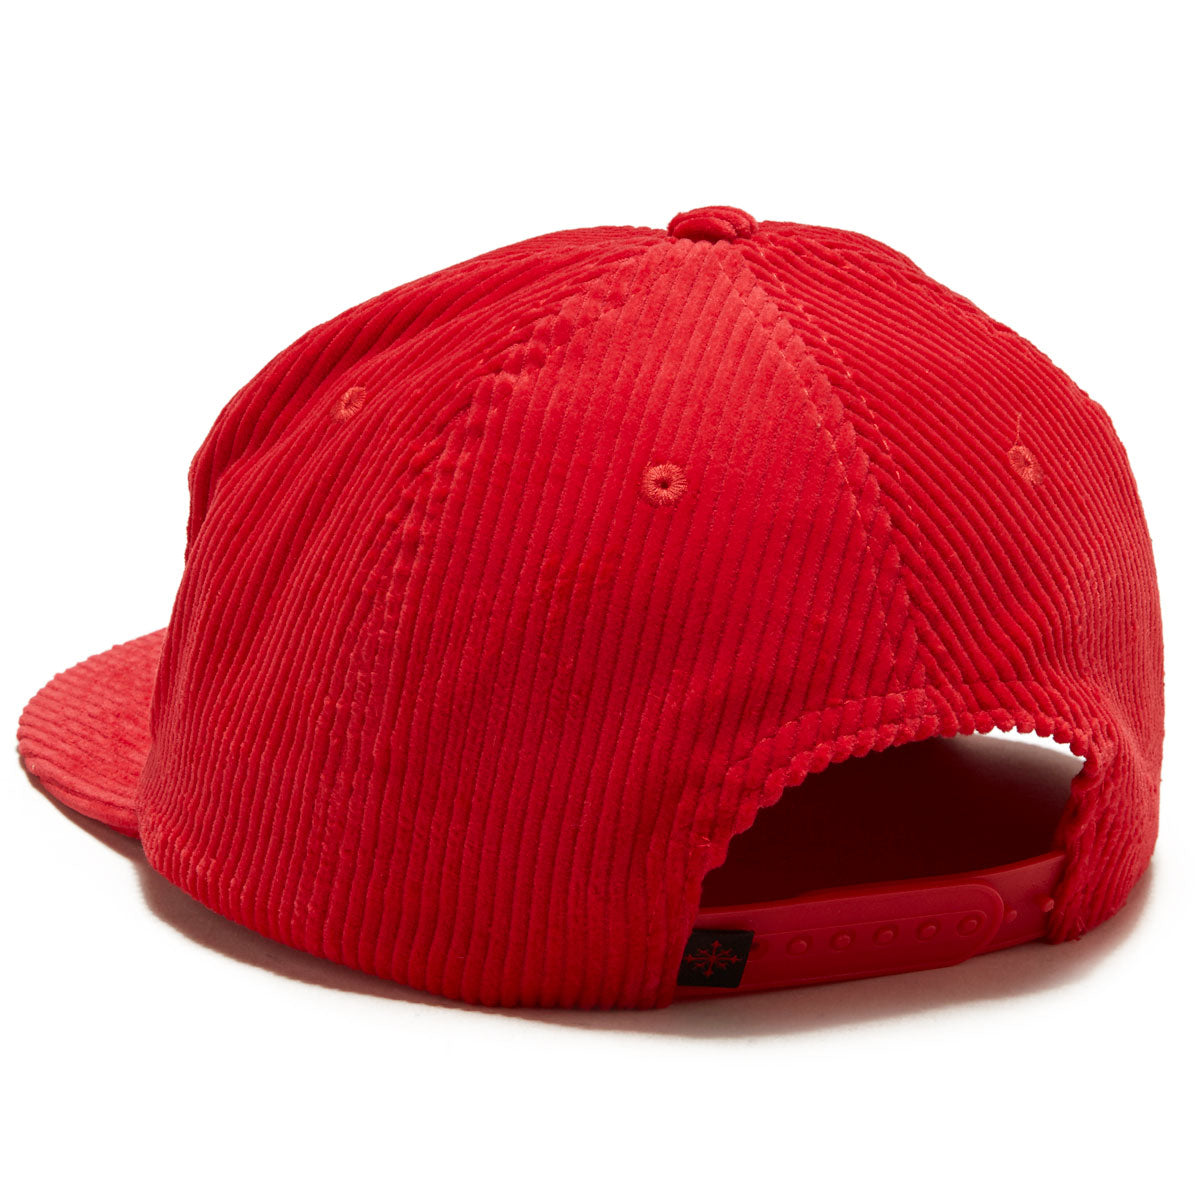 Disorder Eagle Scout Snapback Hat - Red image 2